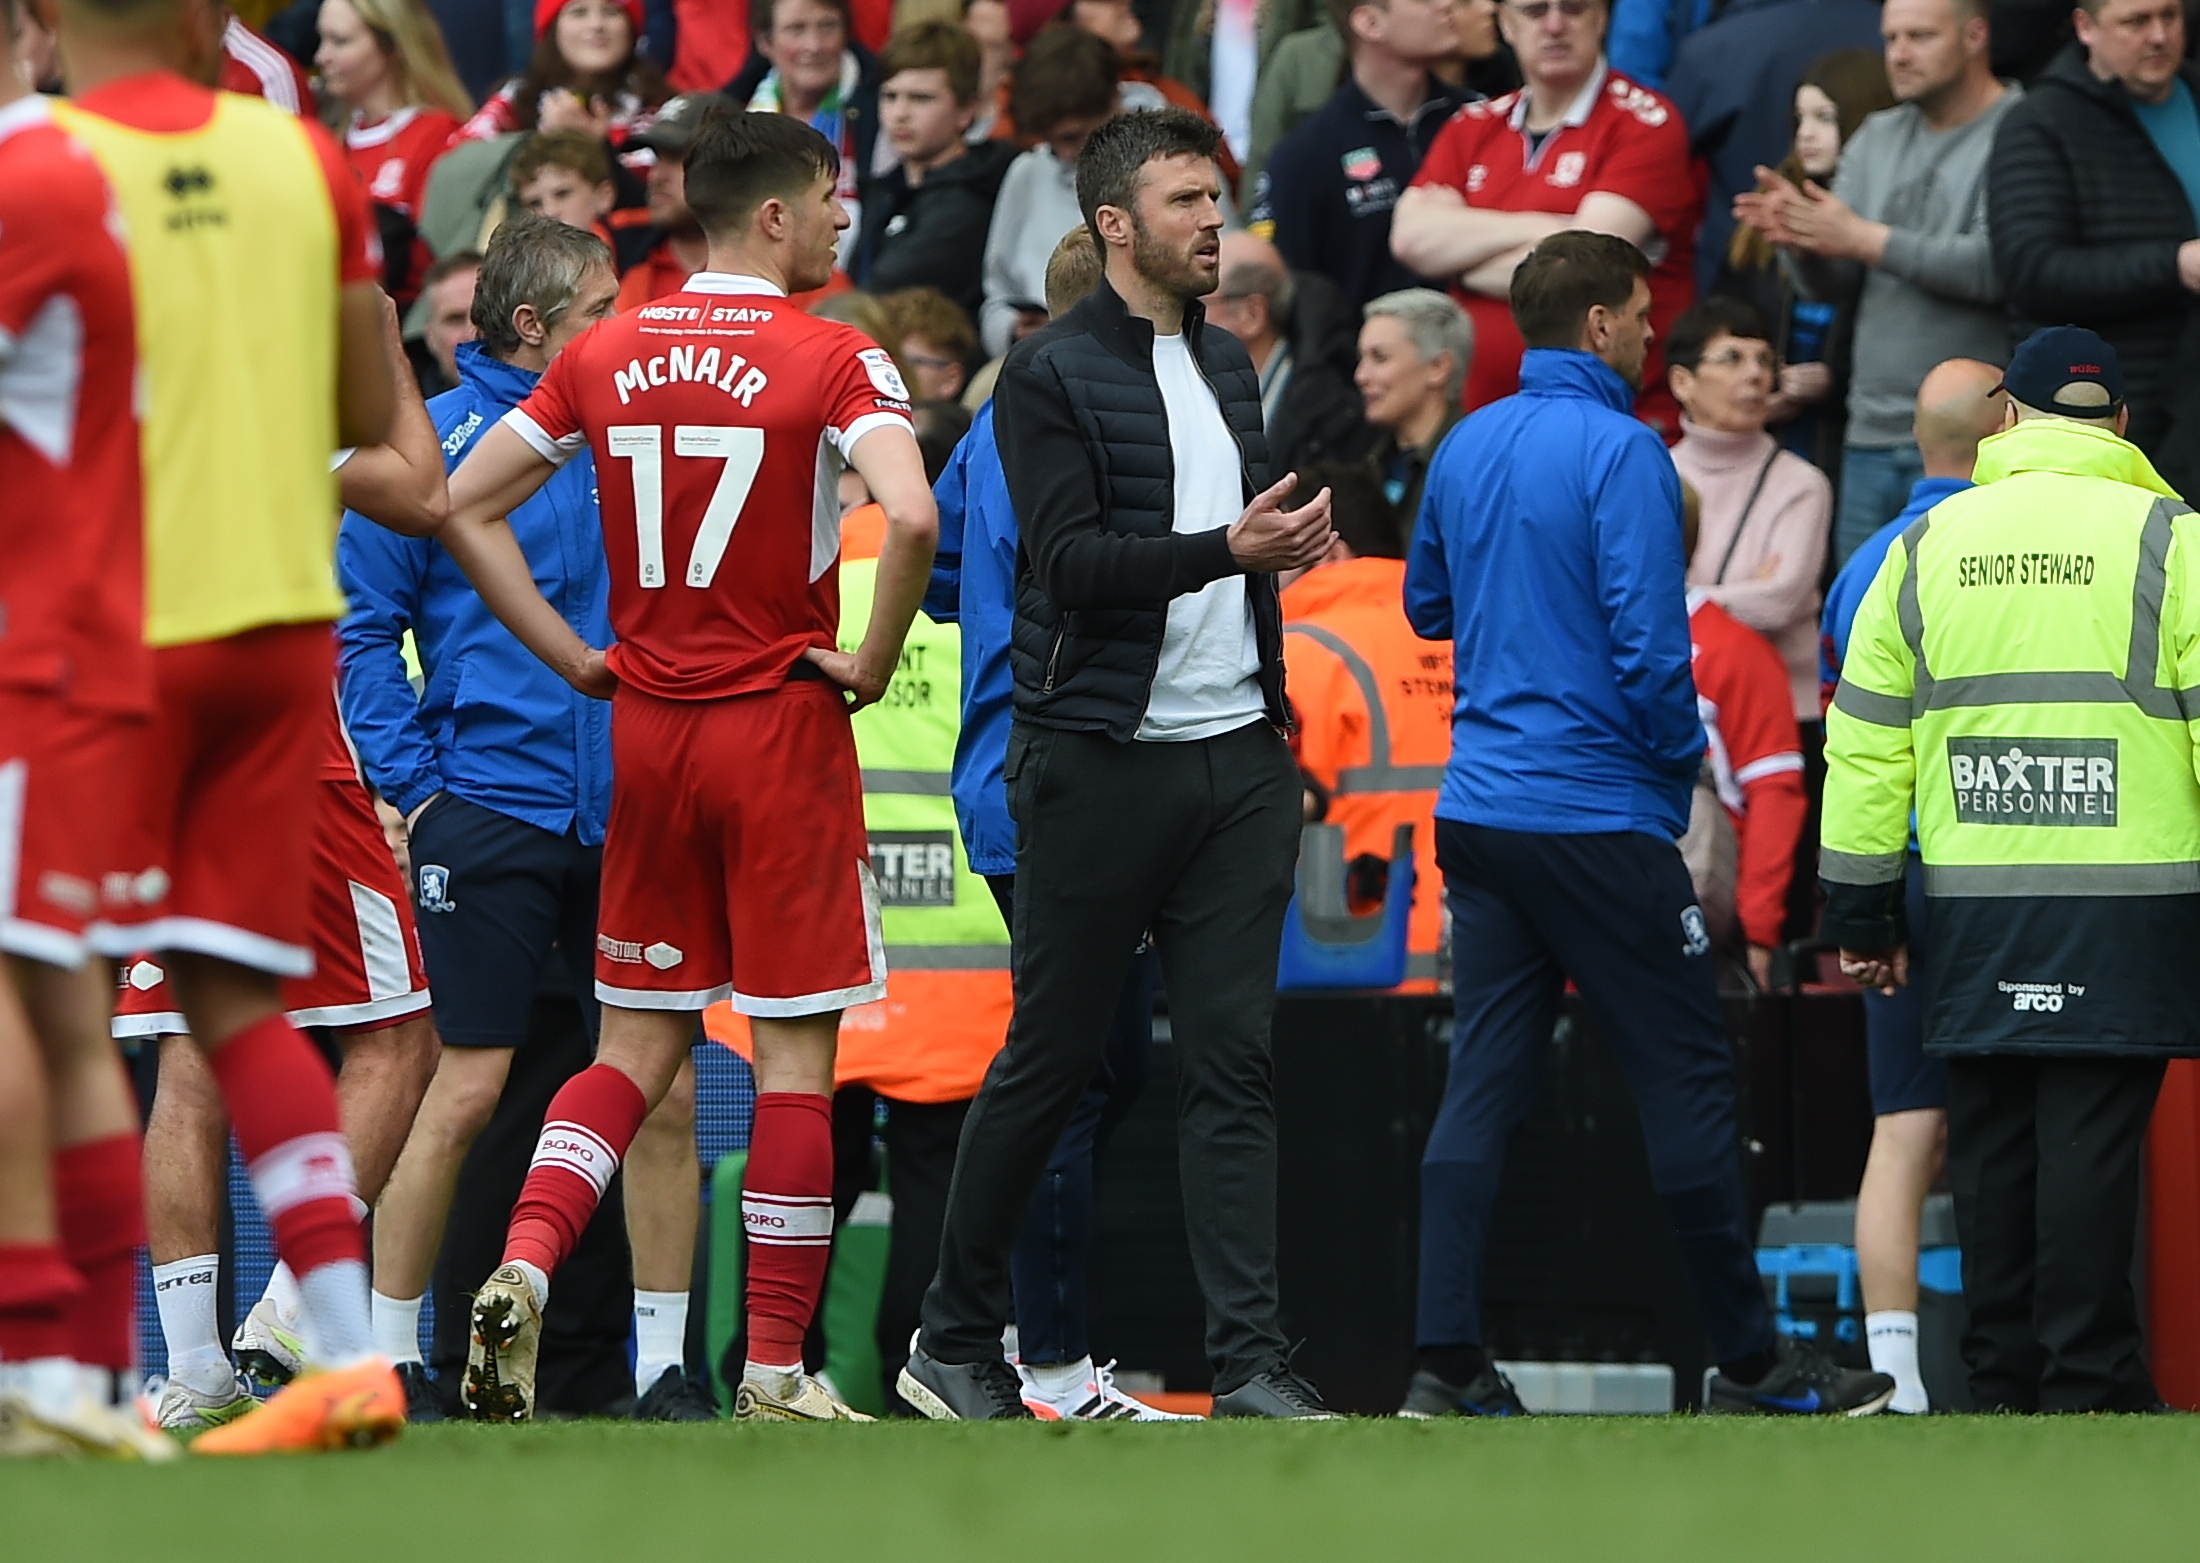 Middlesbrough: Michael Carrick on Coventry and play-off challenge